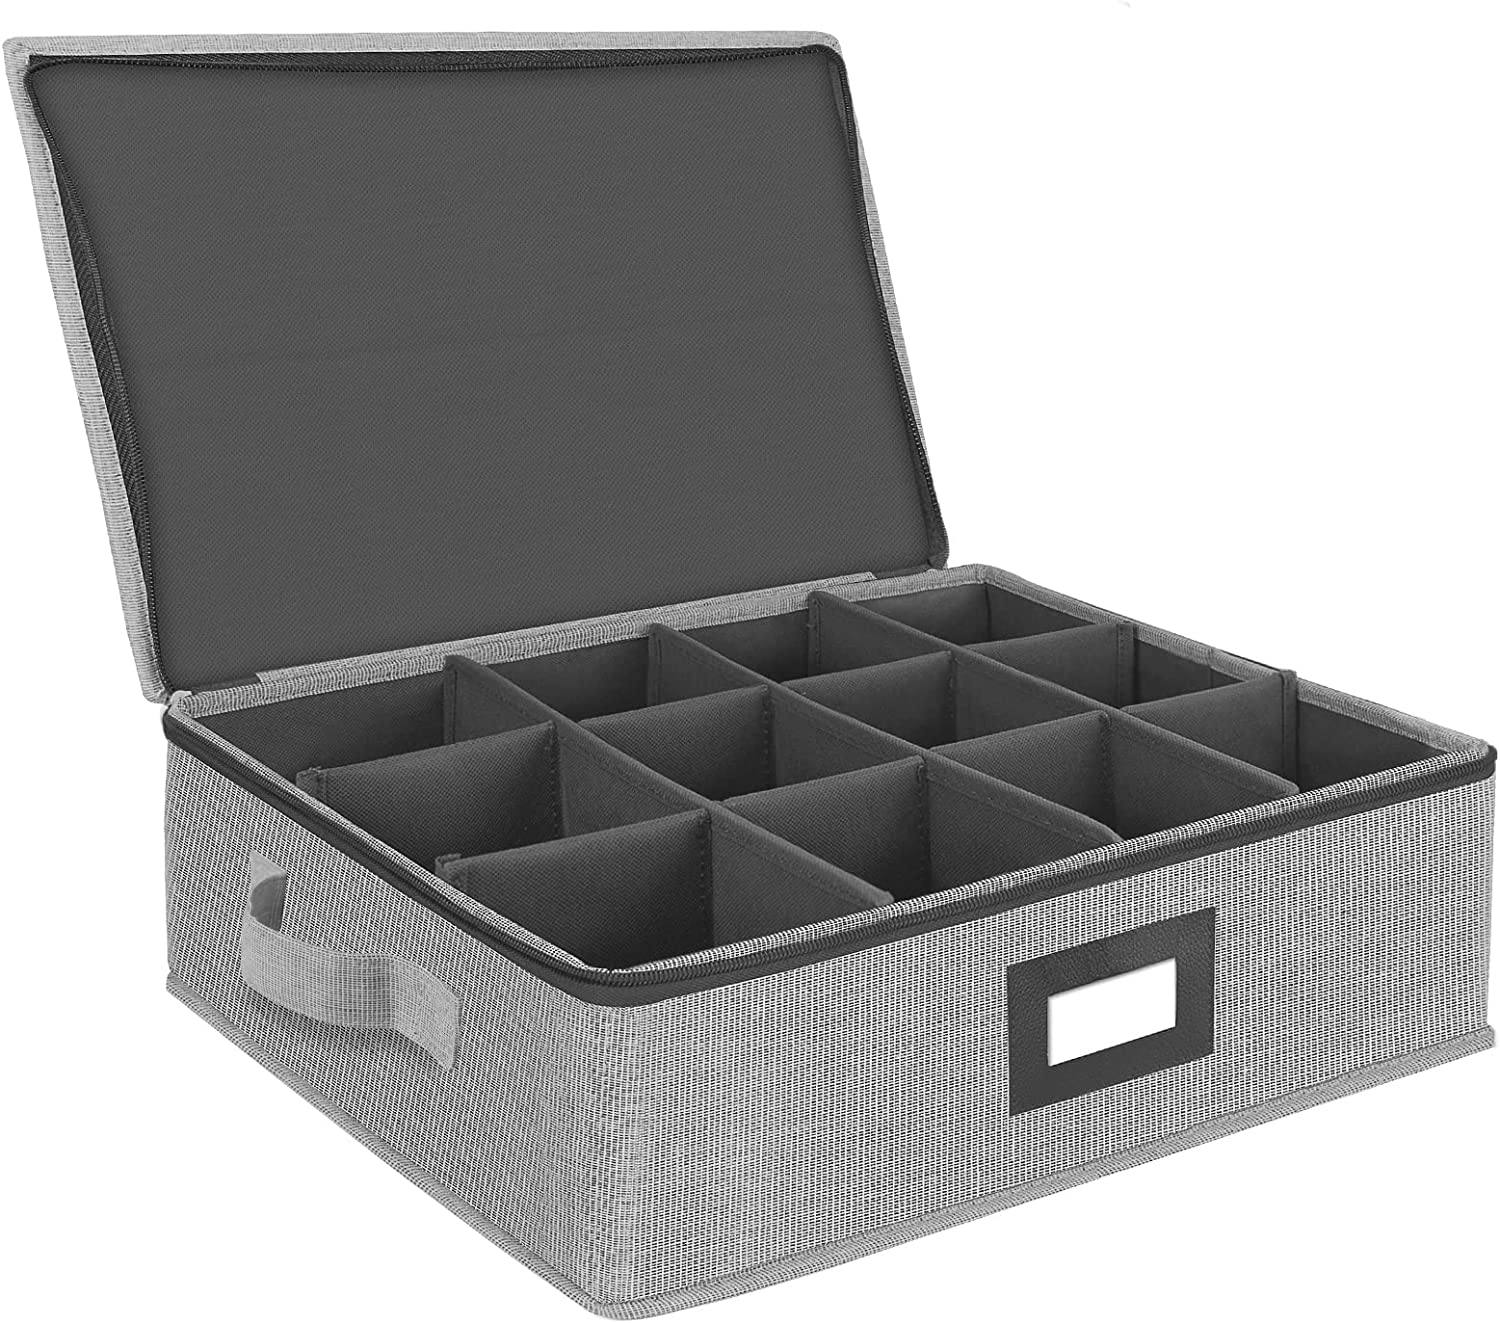 Storage Box Lid Mugs Tea Chest Sets Cups Containers China And Handle (Gray)